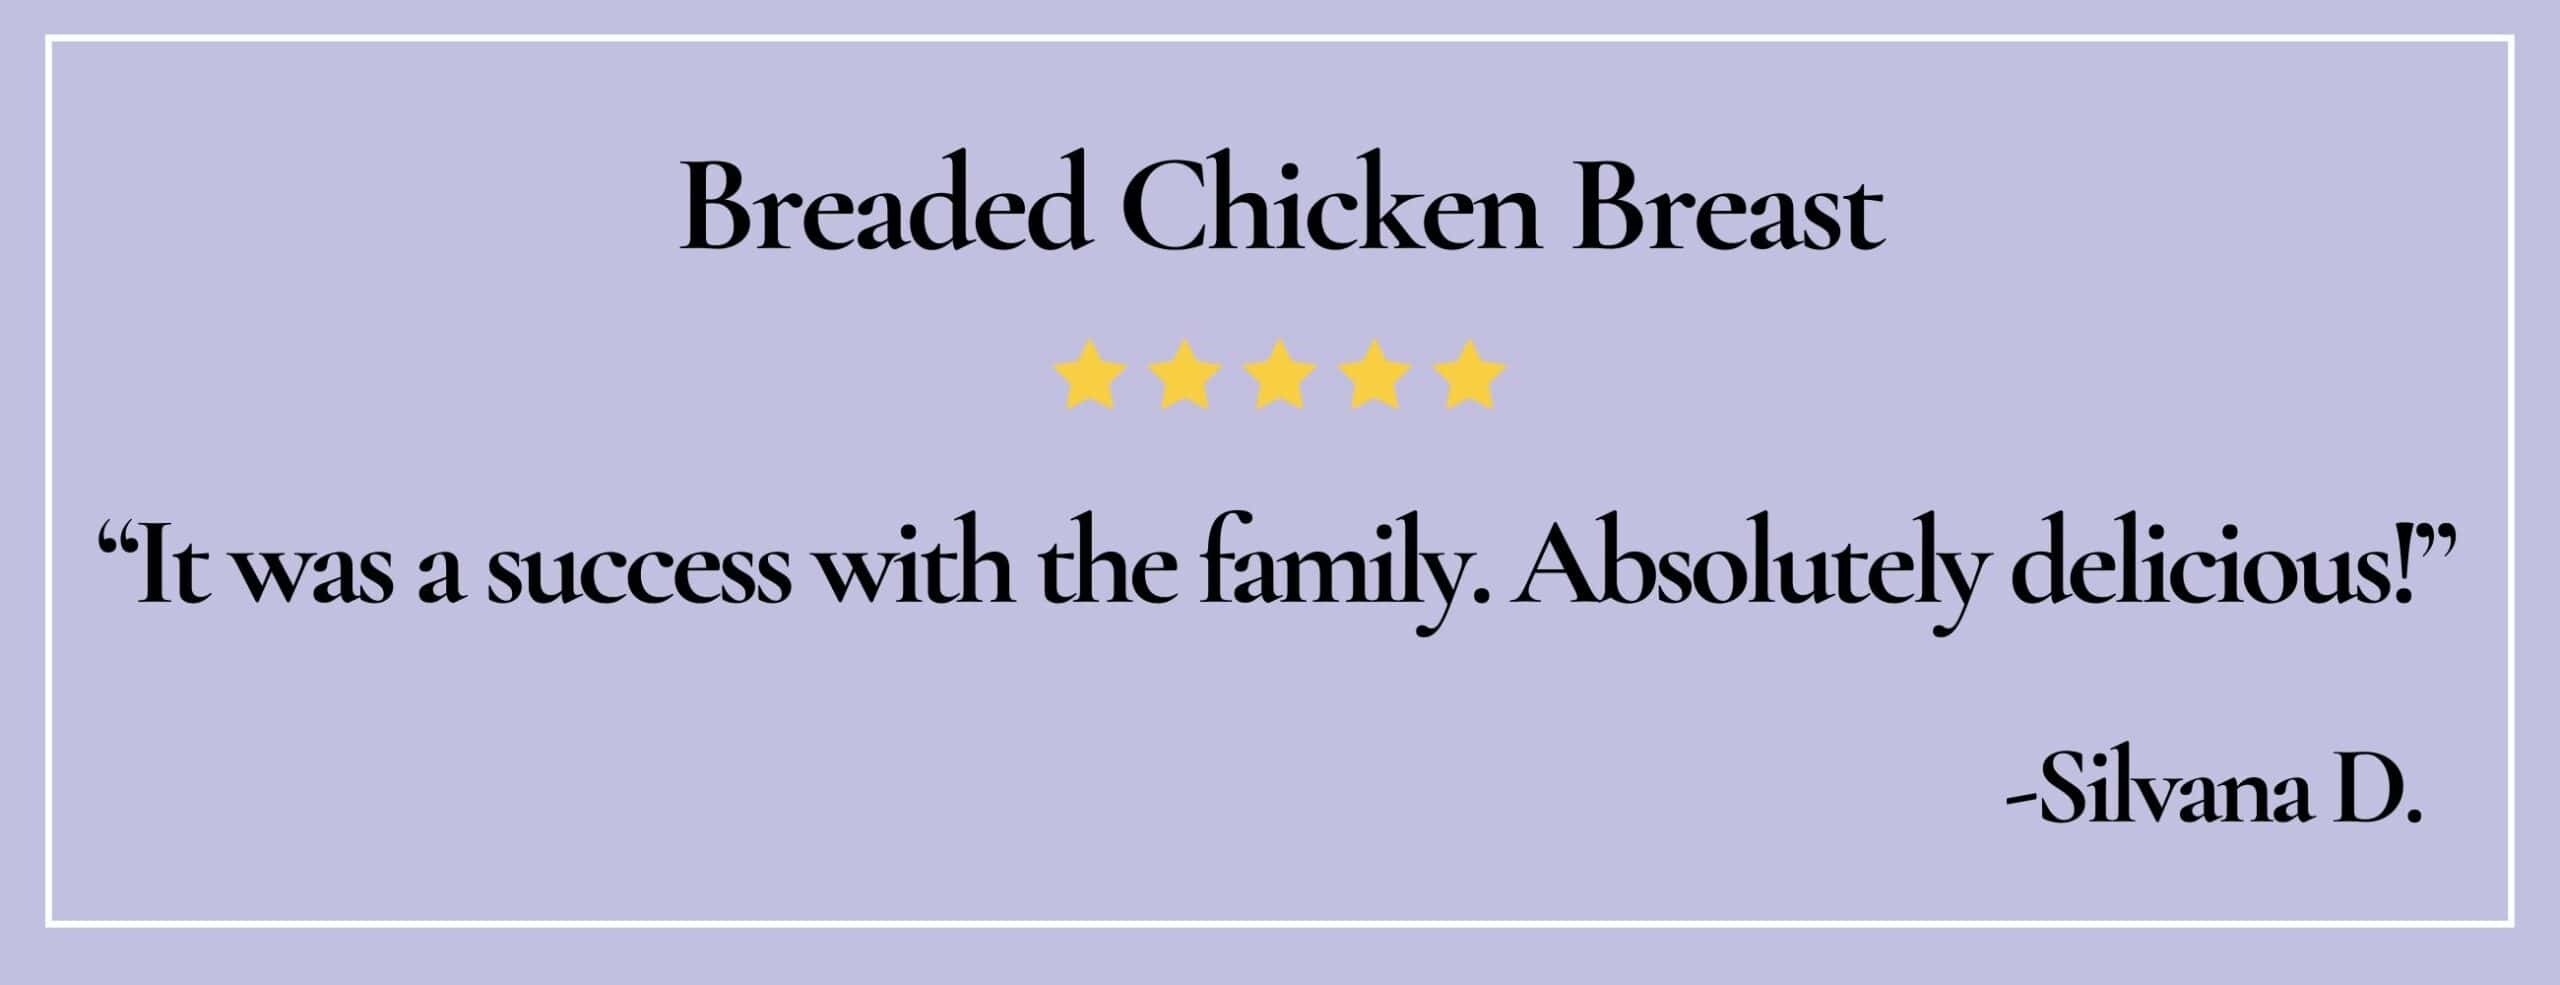 text box with quote: "It was a success with the family. Absolutely delicious!" -Silvana D.